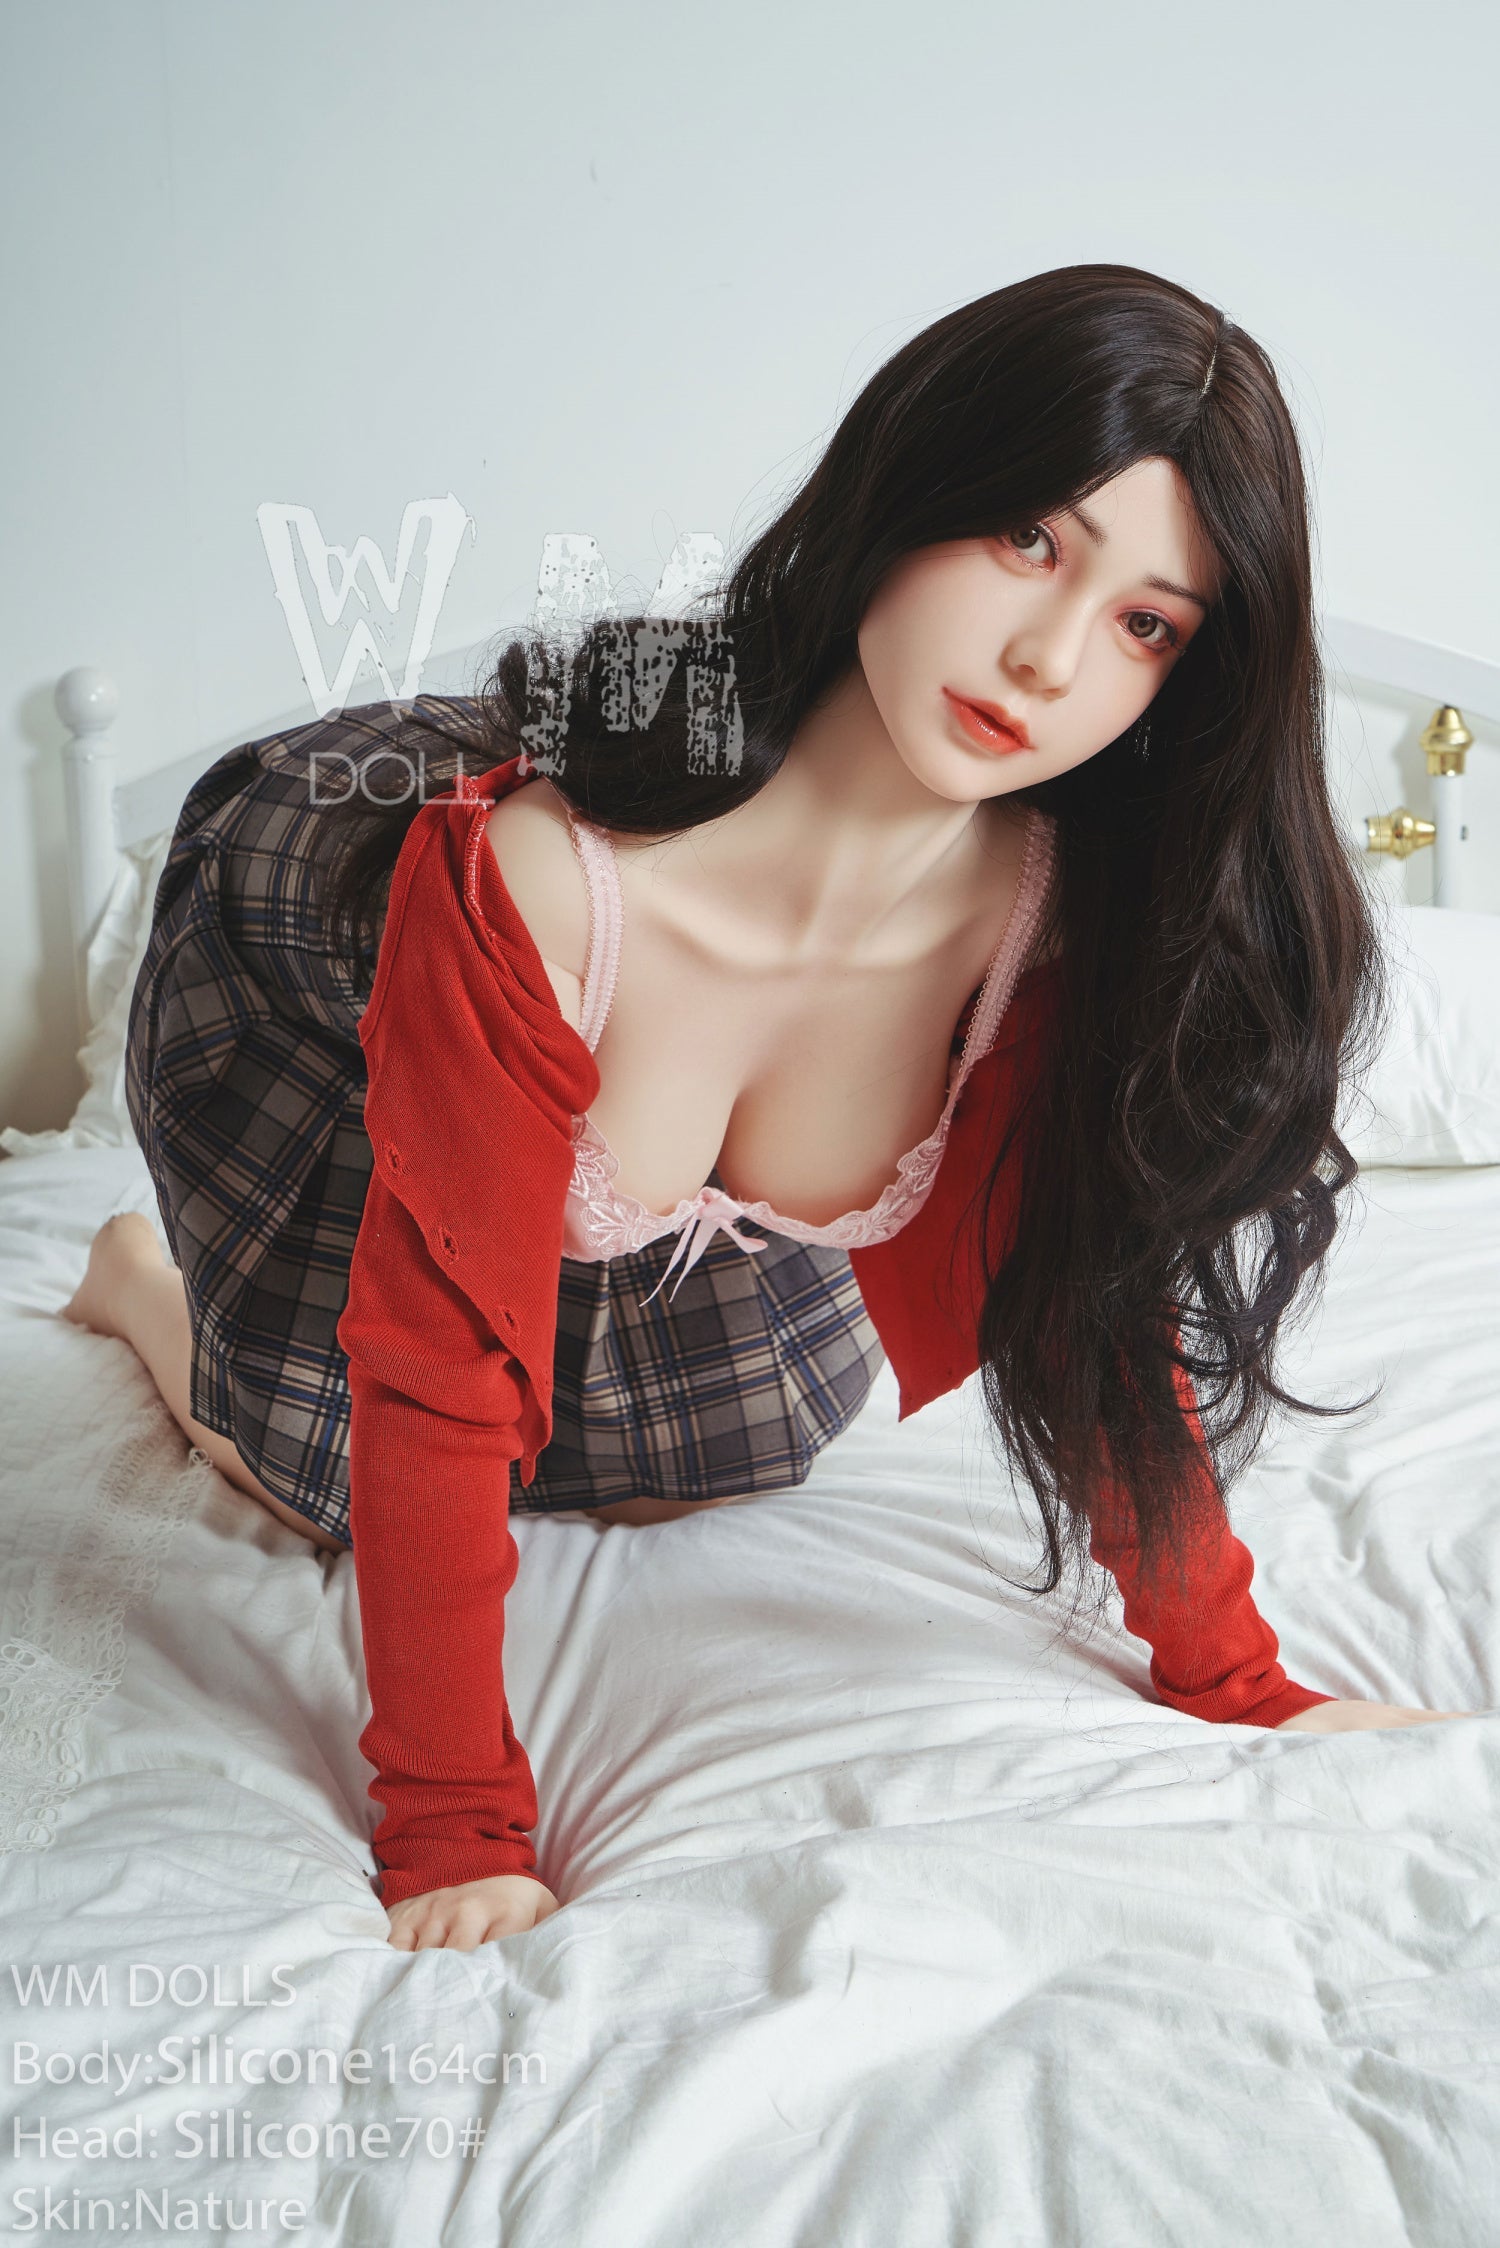 WM Doll 164 cm D Silicone - Margaret | Buy Sex Dolls at DOLLS ACTUALLY